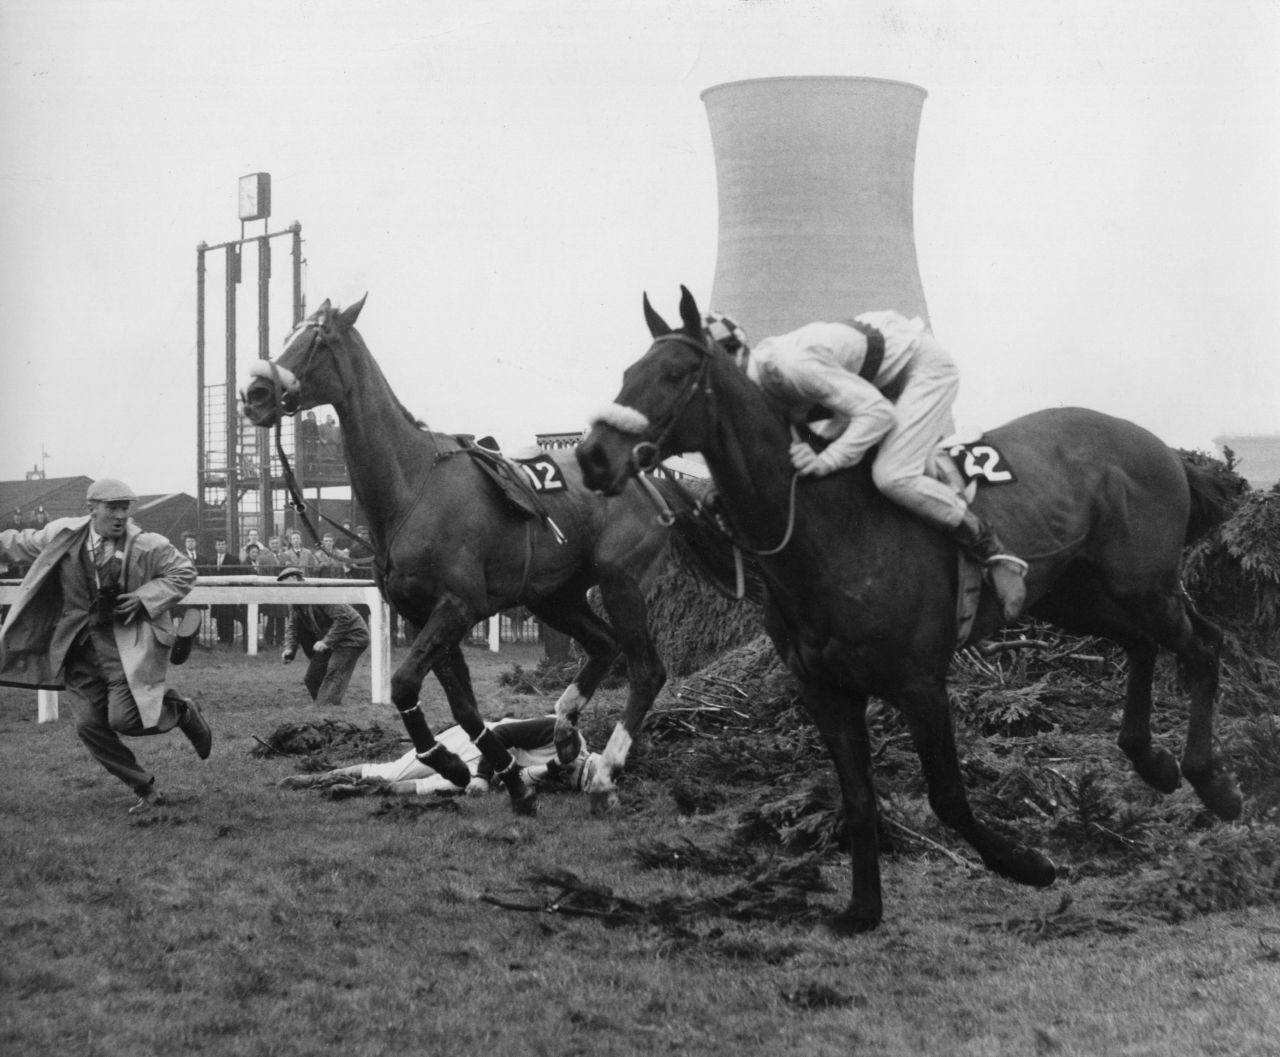 The IJF was founded in 1964 after jockey Paddy Farrell, lying prostrate in this picture, was paralyzed for life after falling at that year's Grand National. With insufficient assistance then available to jockeys in such plight, and with Tim Brookshaw having also suffered paralysis not long before, the Farrell-Brookshaw fund was created - ultimately turning into today's IJF. 